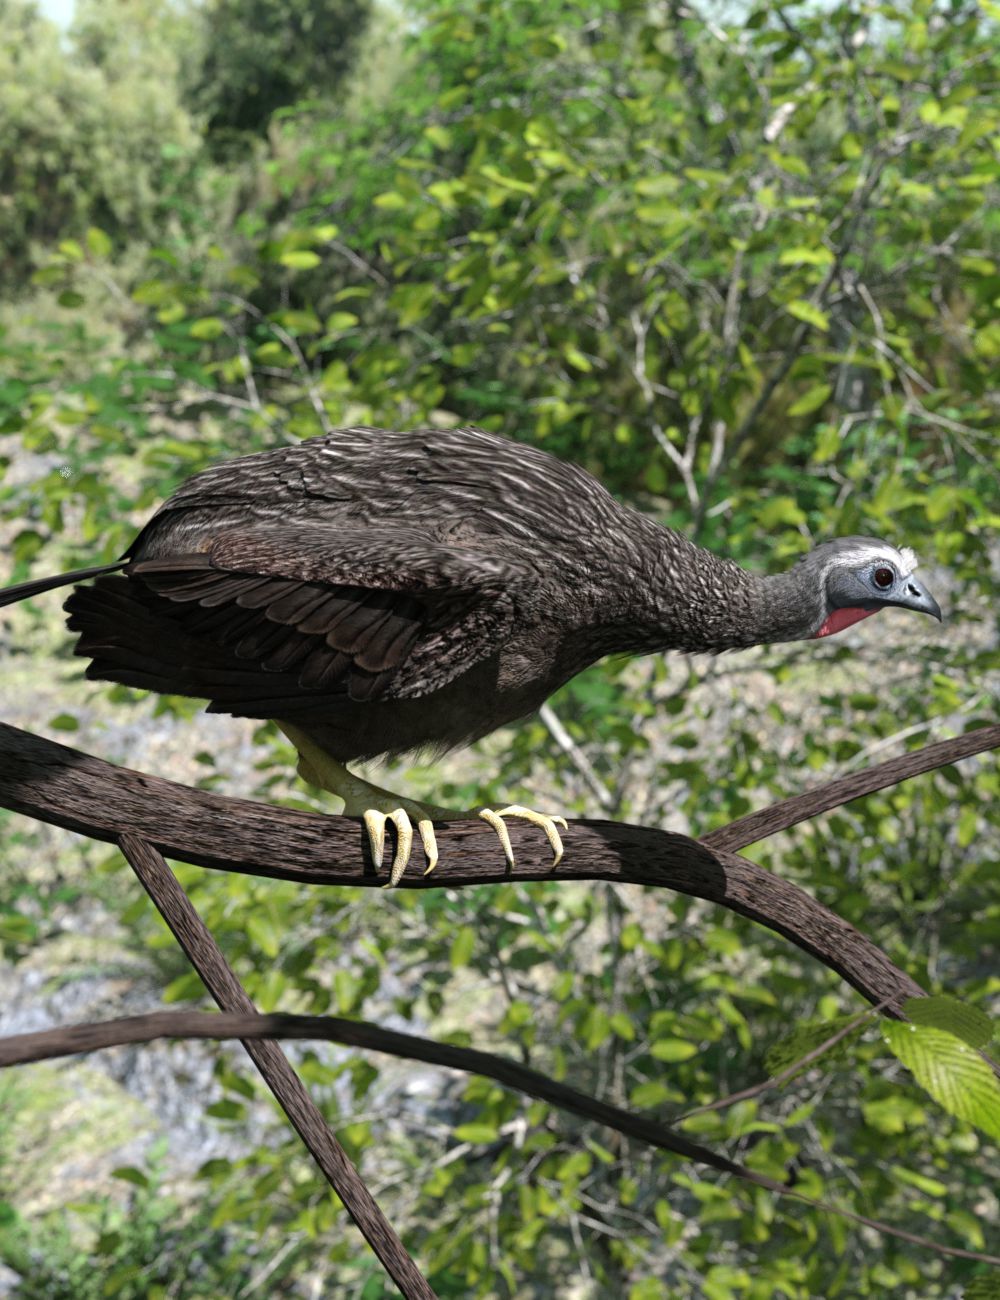 Image of White-browed Guan